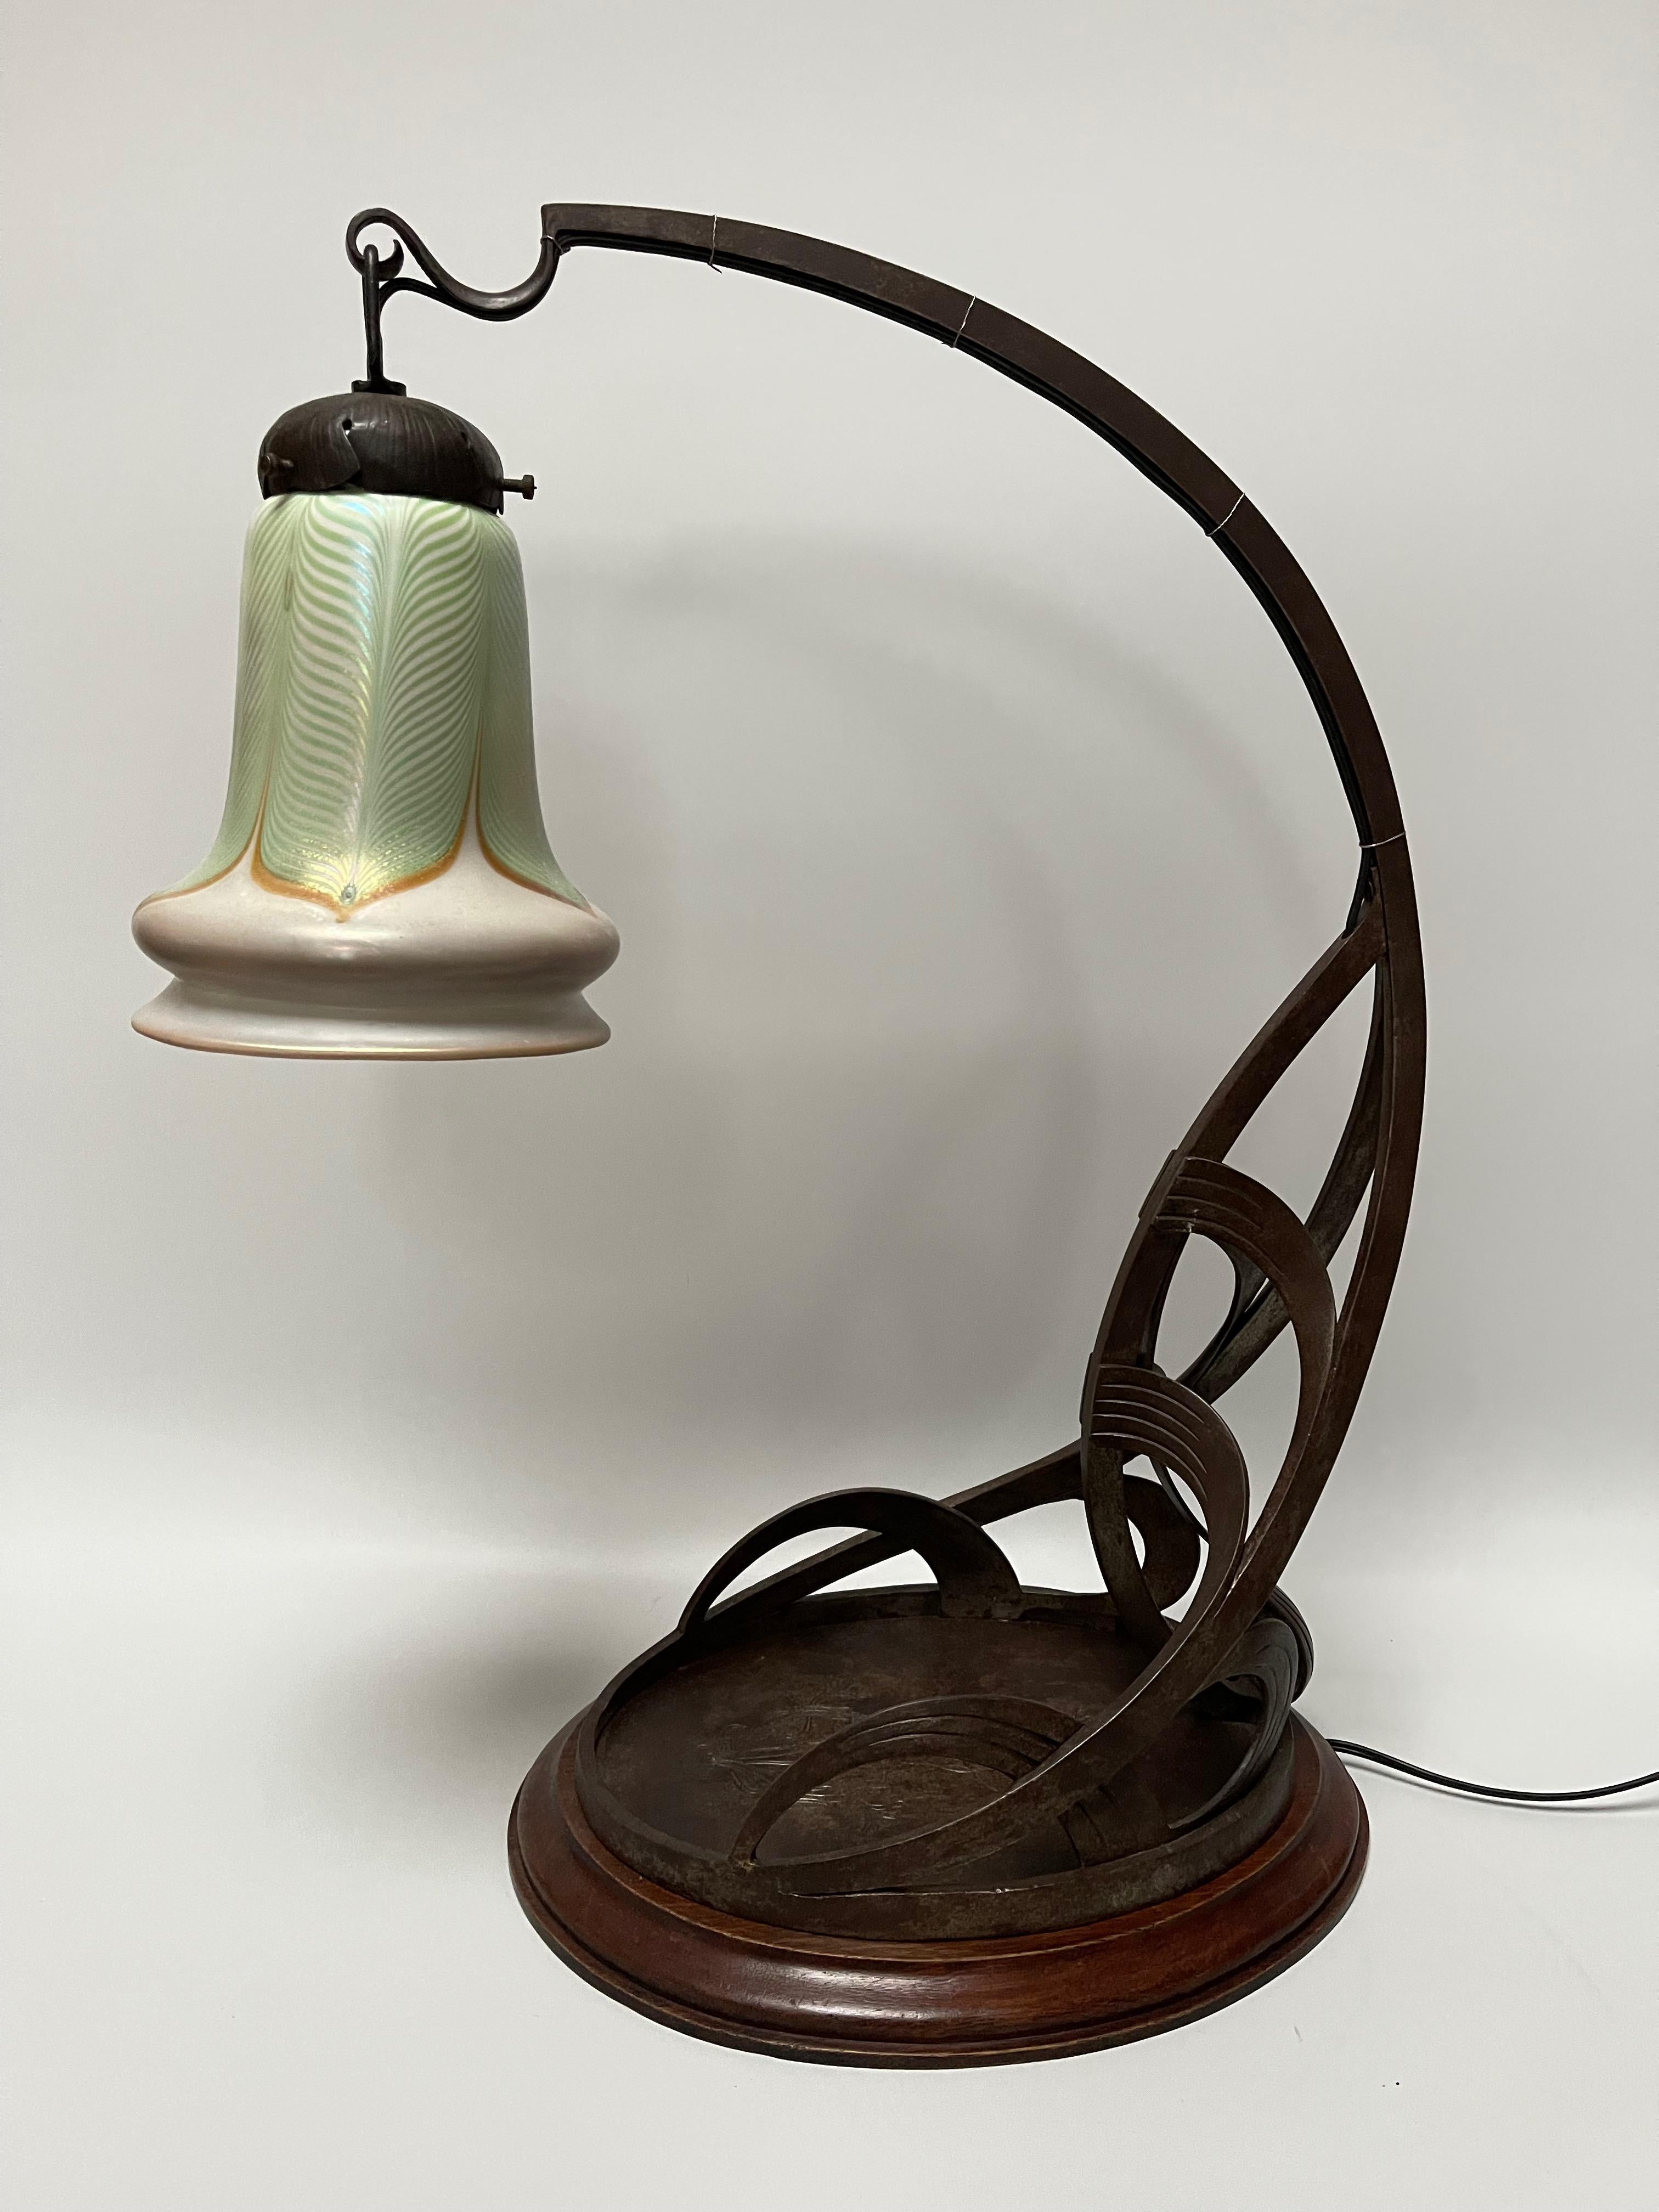 Large art nouveau lamp circa 1900.
Wrought iron frame mounted on a wooden base.
Glass tulip signed Quezal. Signature stamped on the collar of the tuipe.
Wrought iron frame made by Cherpions establishments, signed on the claw of the tulip 